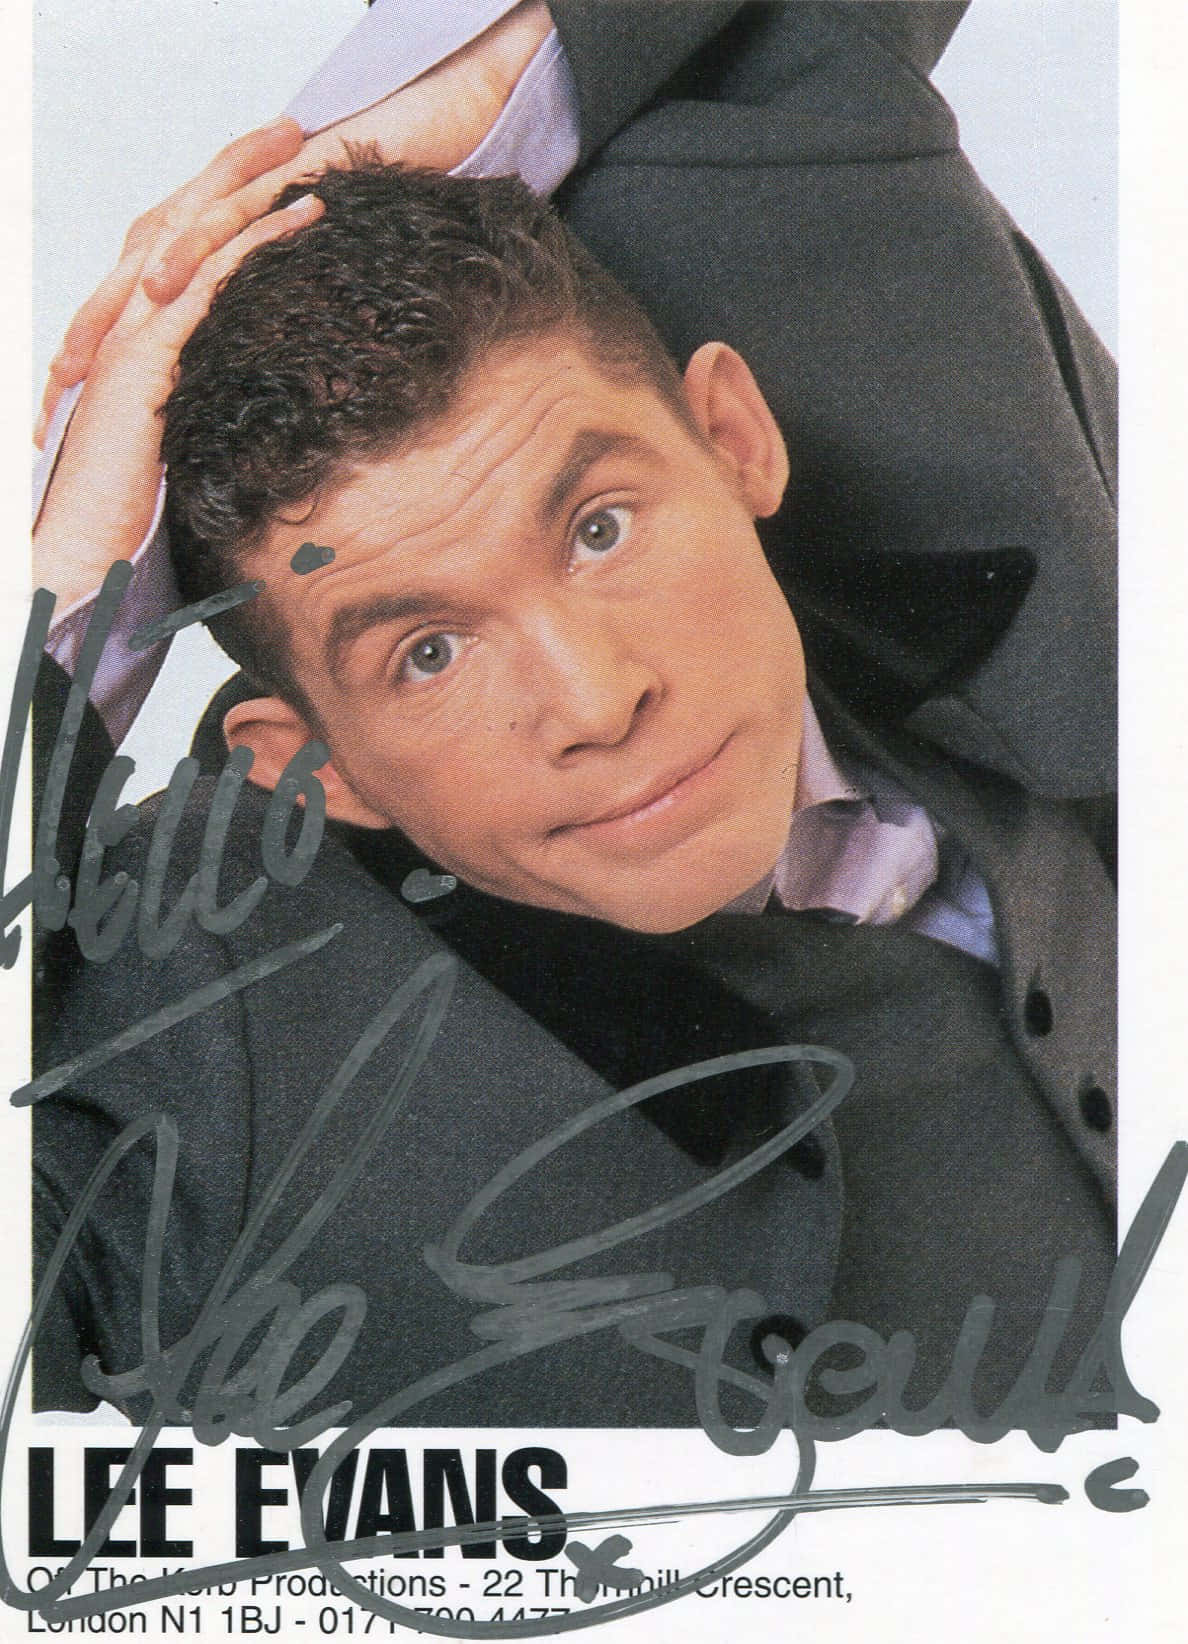 Actor Lee Evans in a comedy role Wallpaper